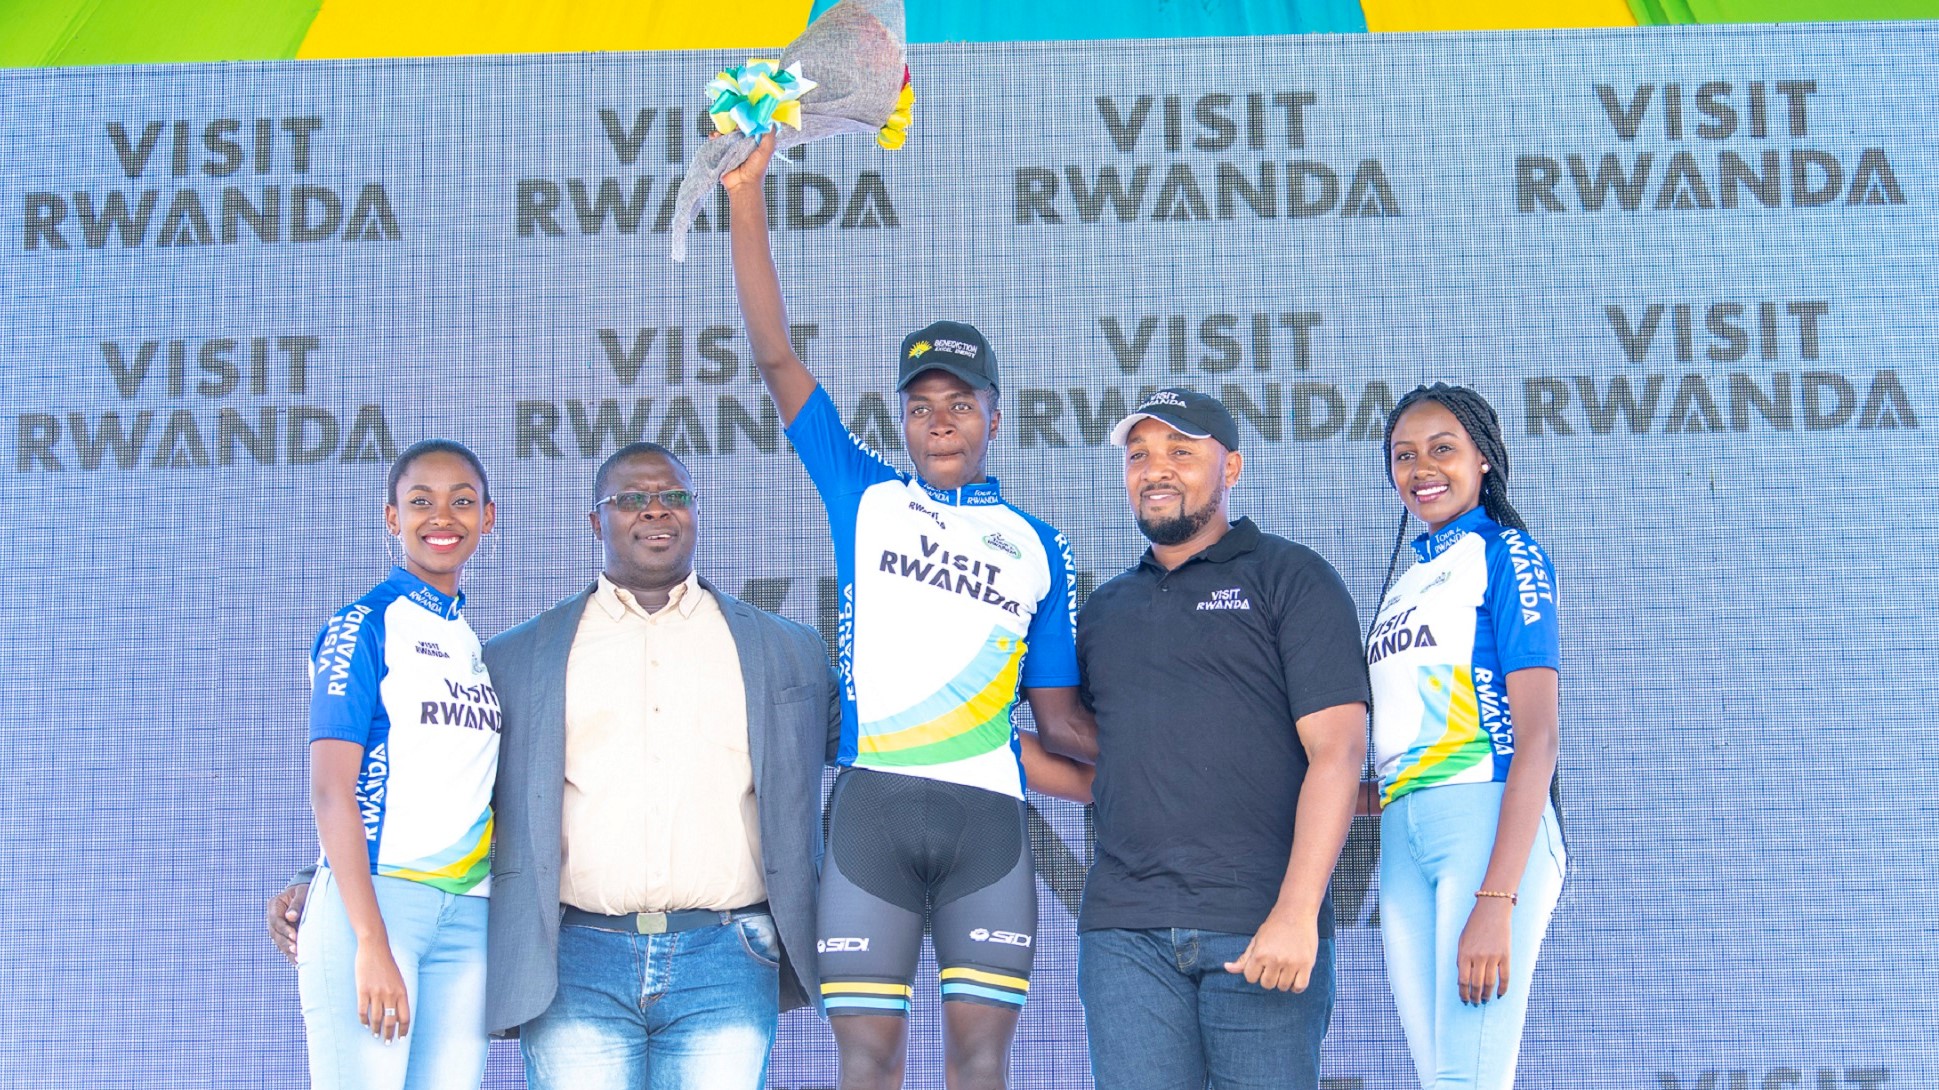 Didier Munyaneza, seen here in RDB jersey as the best Rwandan rider after Stage 4 in Karongi, holds the record for the youngest national champion in Rwanda cycling history, which he attained in June 2018. Plaisir Muzogeye